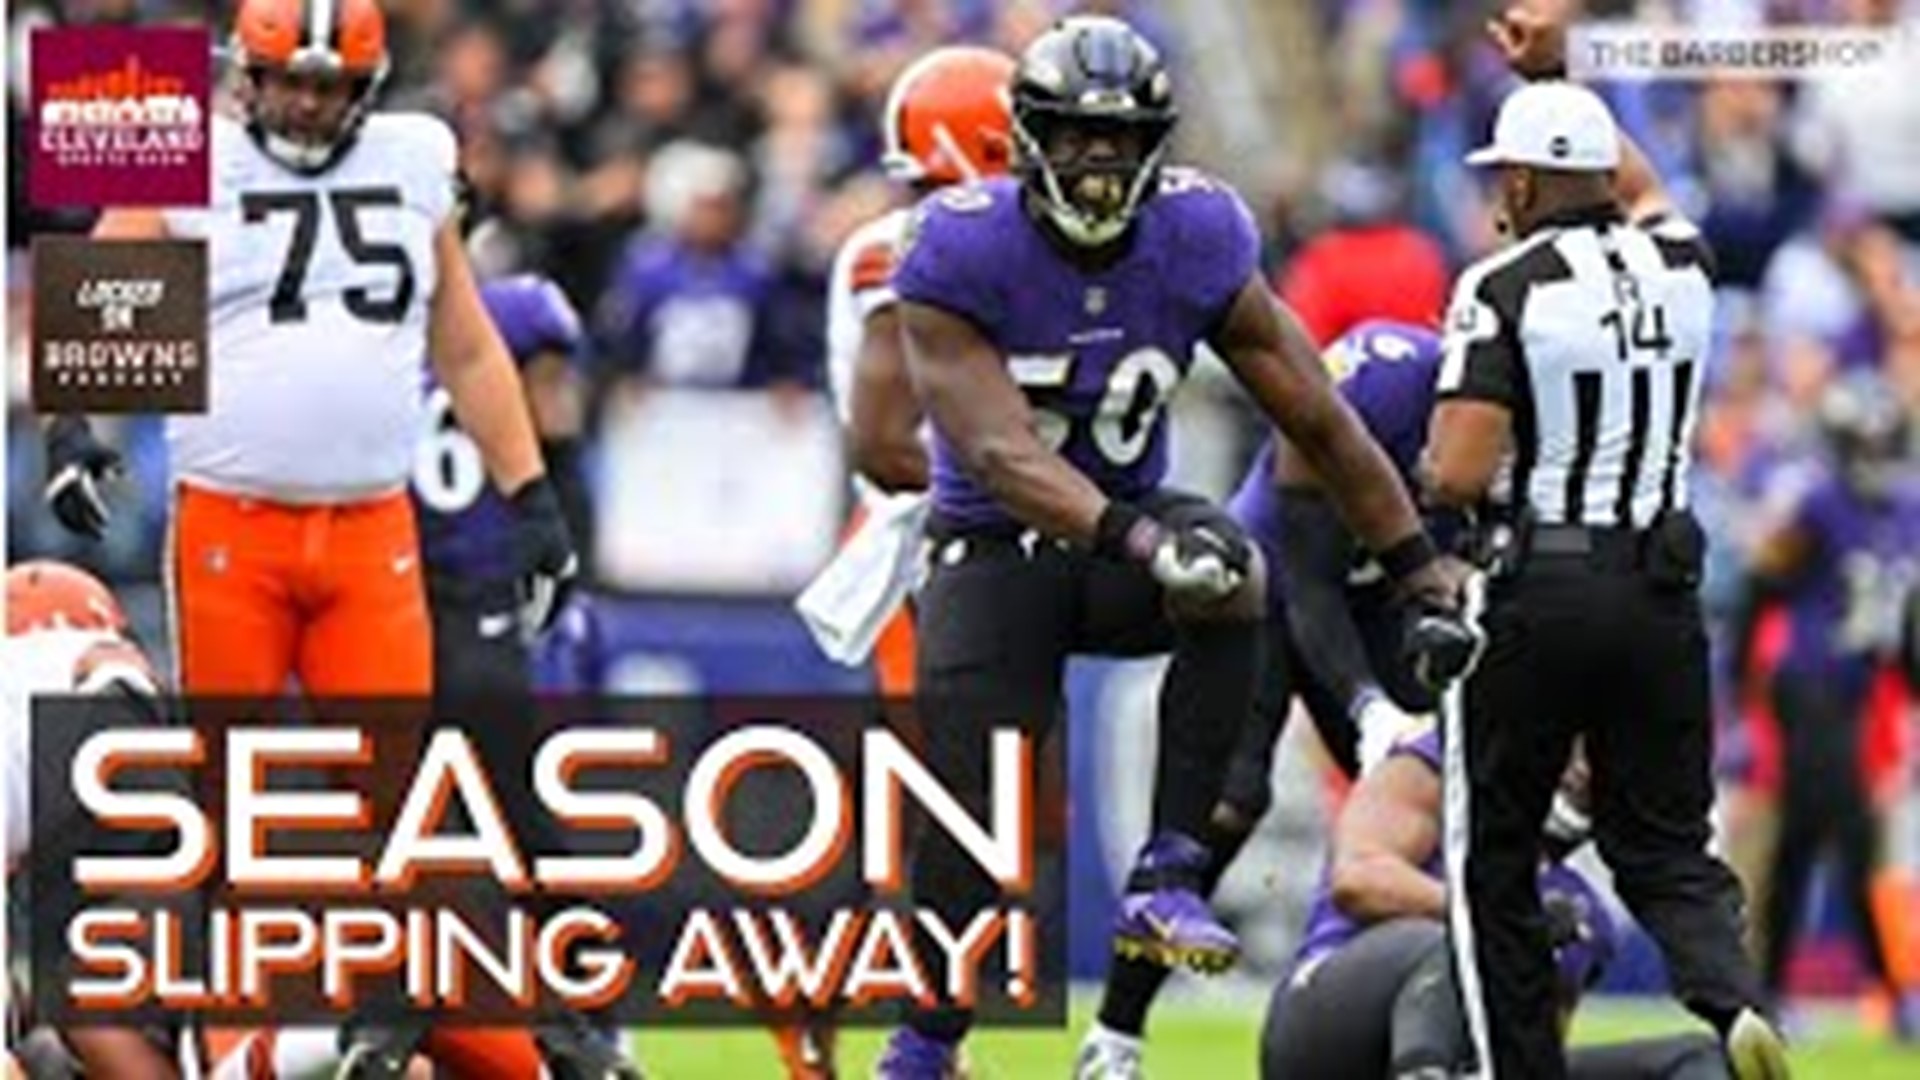 The Cleveland Browns fell to 2-5 with a 23-20 loss to the Baltimore Ravens on Sunday.